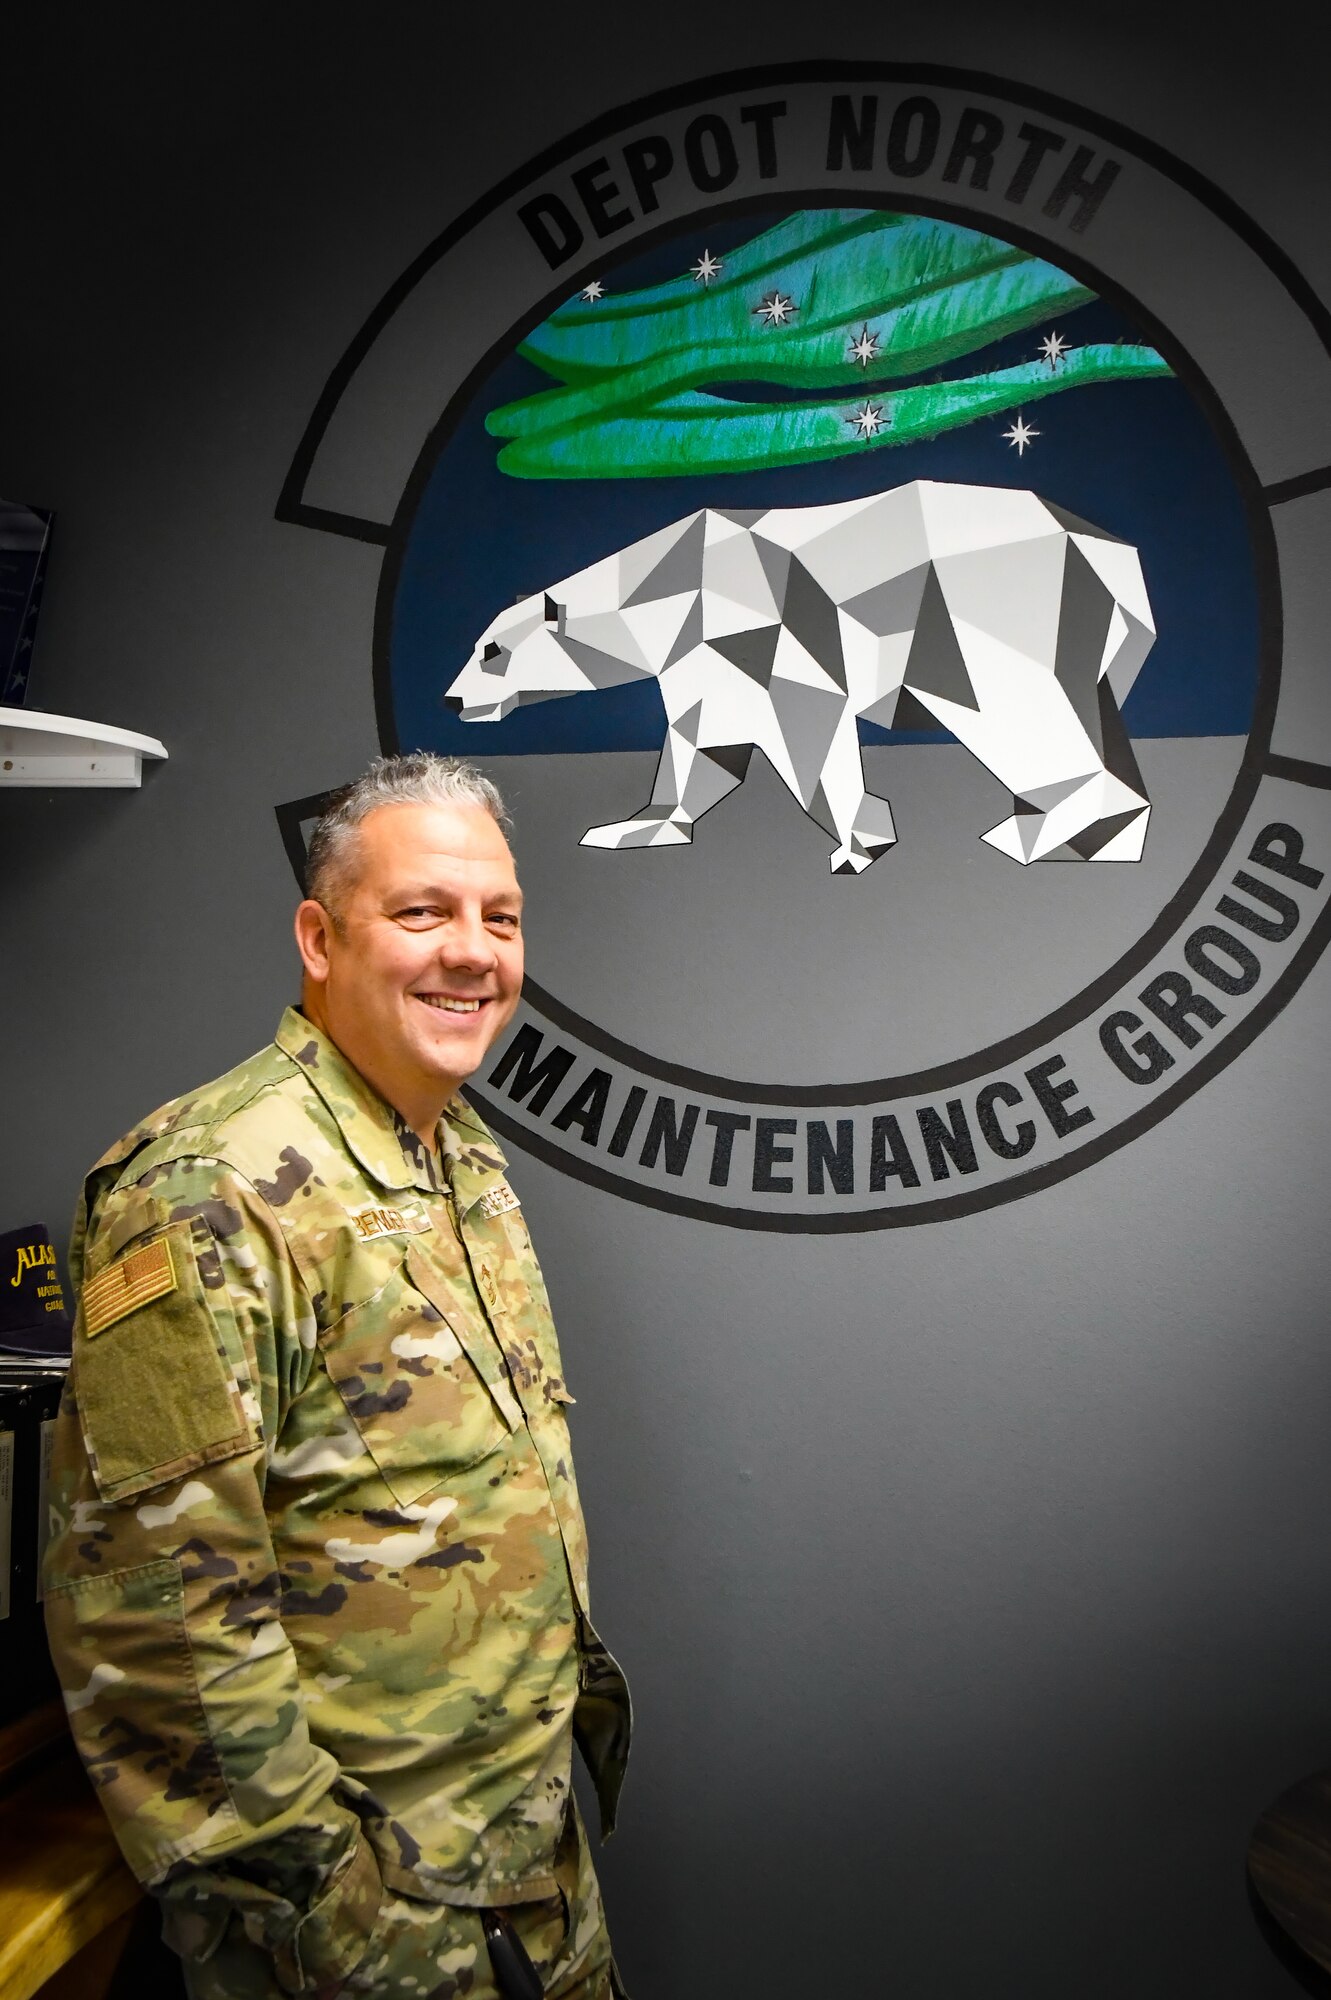 U.S. Air Force Chief Master Sgt. George Bender of the 168th Wing, 168th Maintenance Group, stands in front of his art mural representing the MXG patch, hanging in the MXG hangar at Eielson Air Force Base.